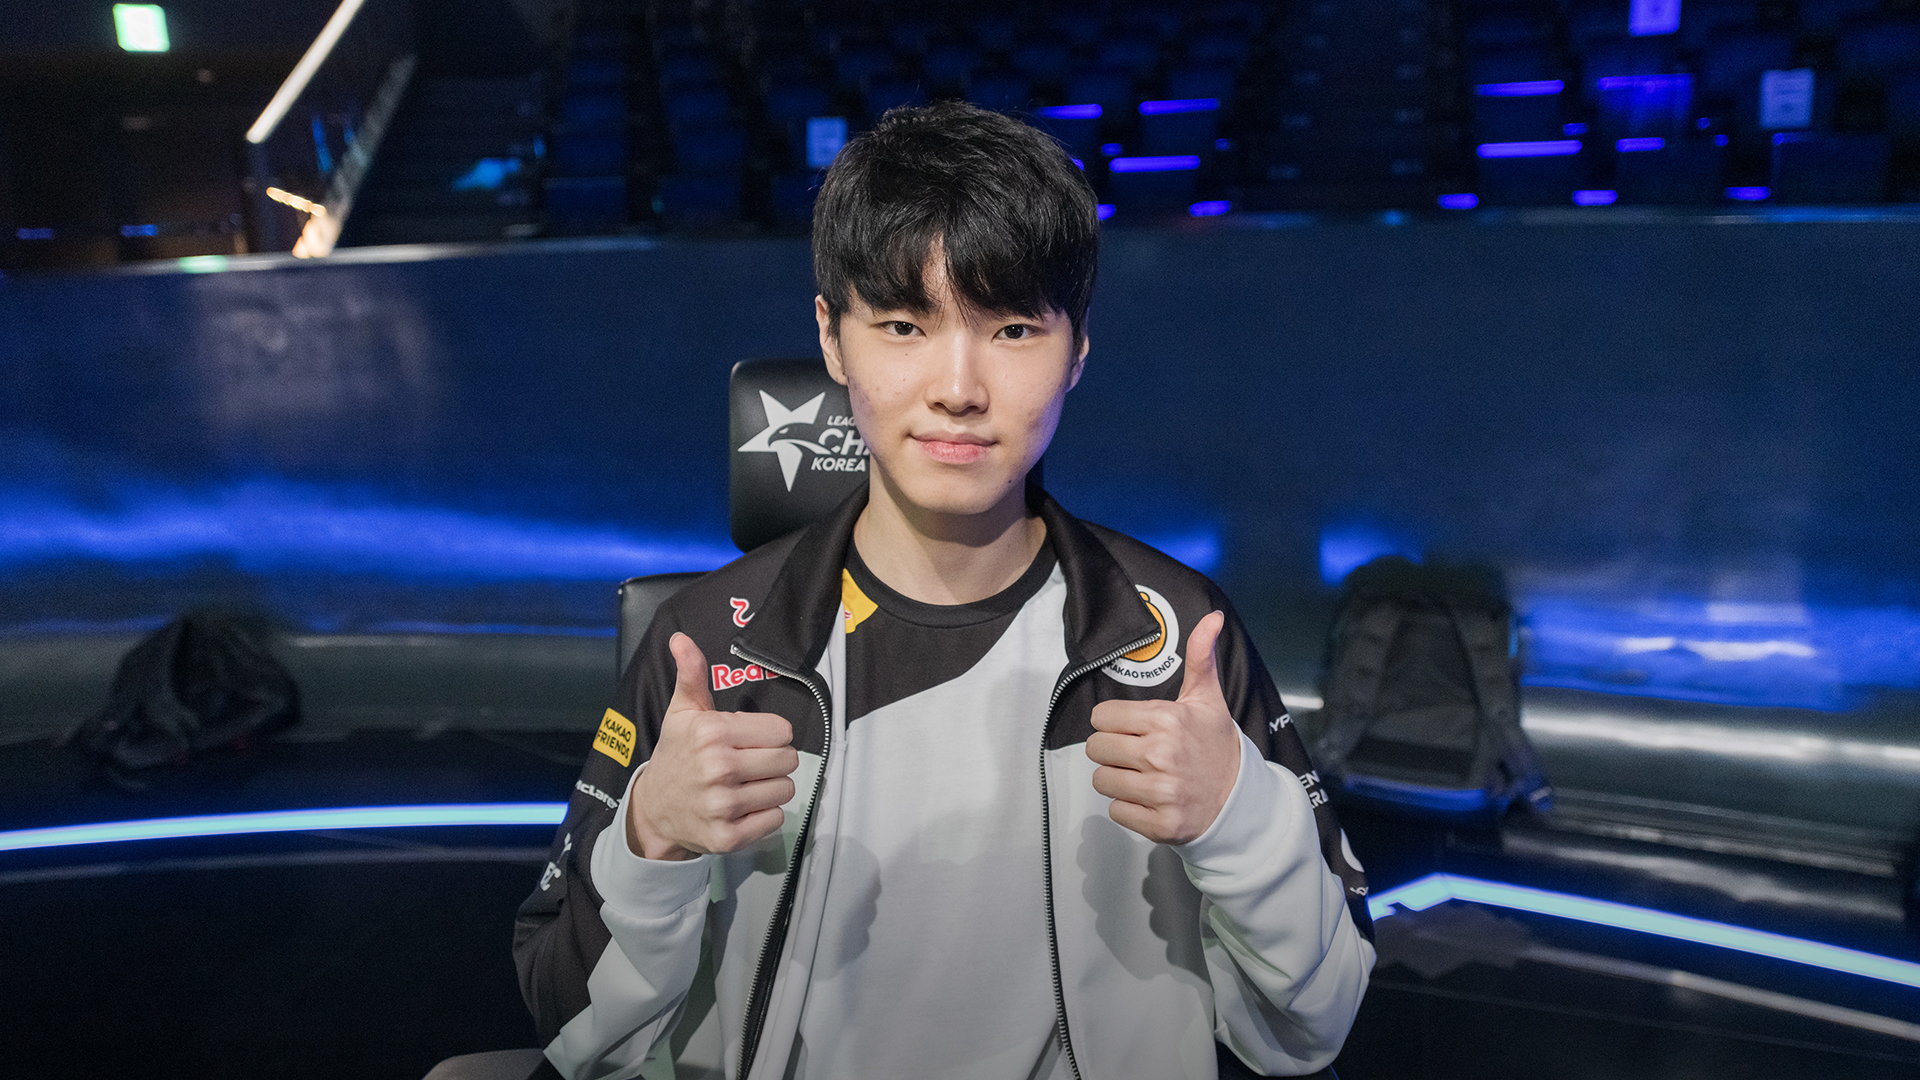 DRX Chovy after qualifying for Worlds: “It doesn't really feel real now” -  Snowball Esports